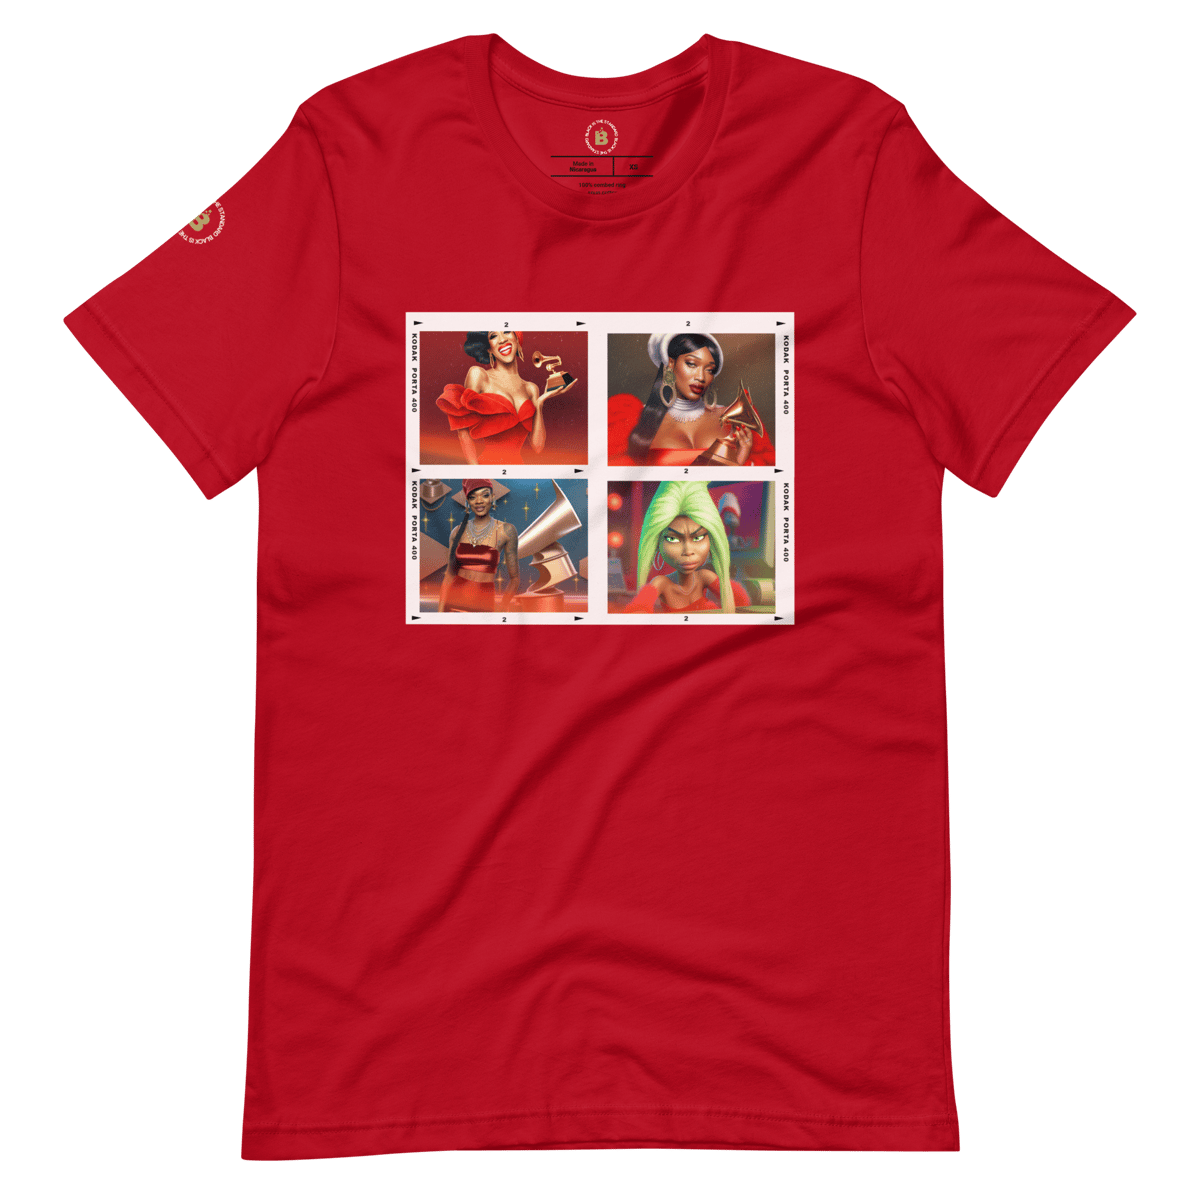 Image of "Petty Boots" Female Rappers Tee